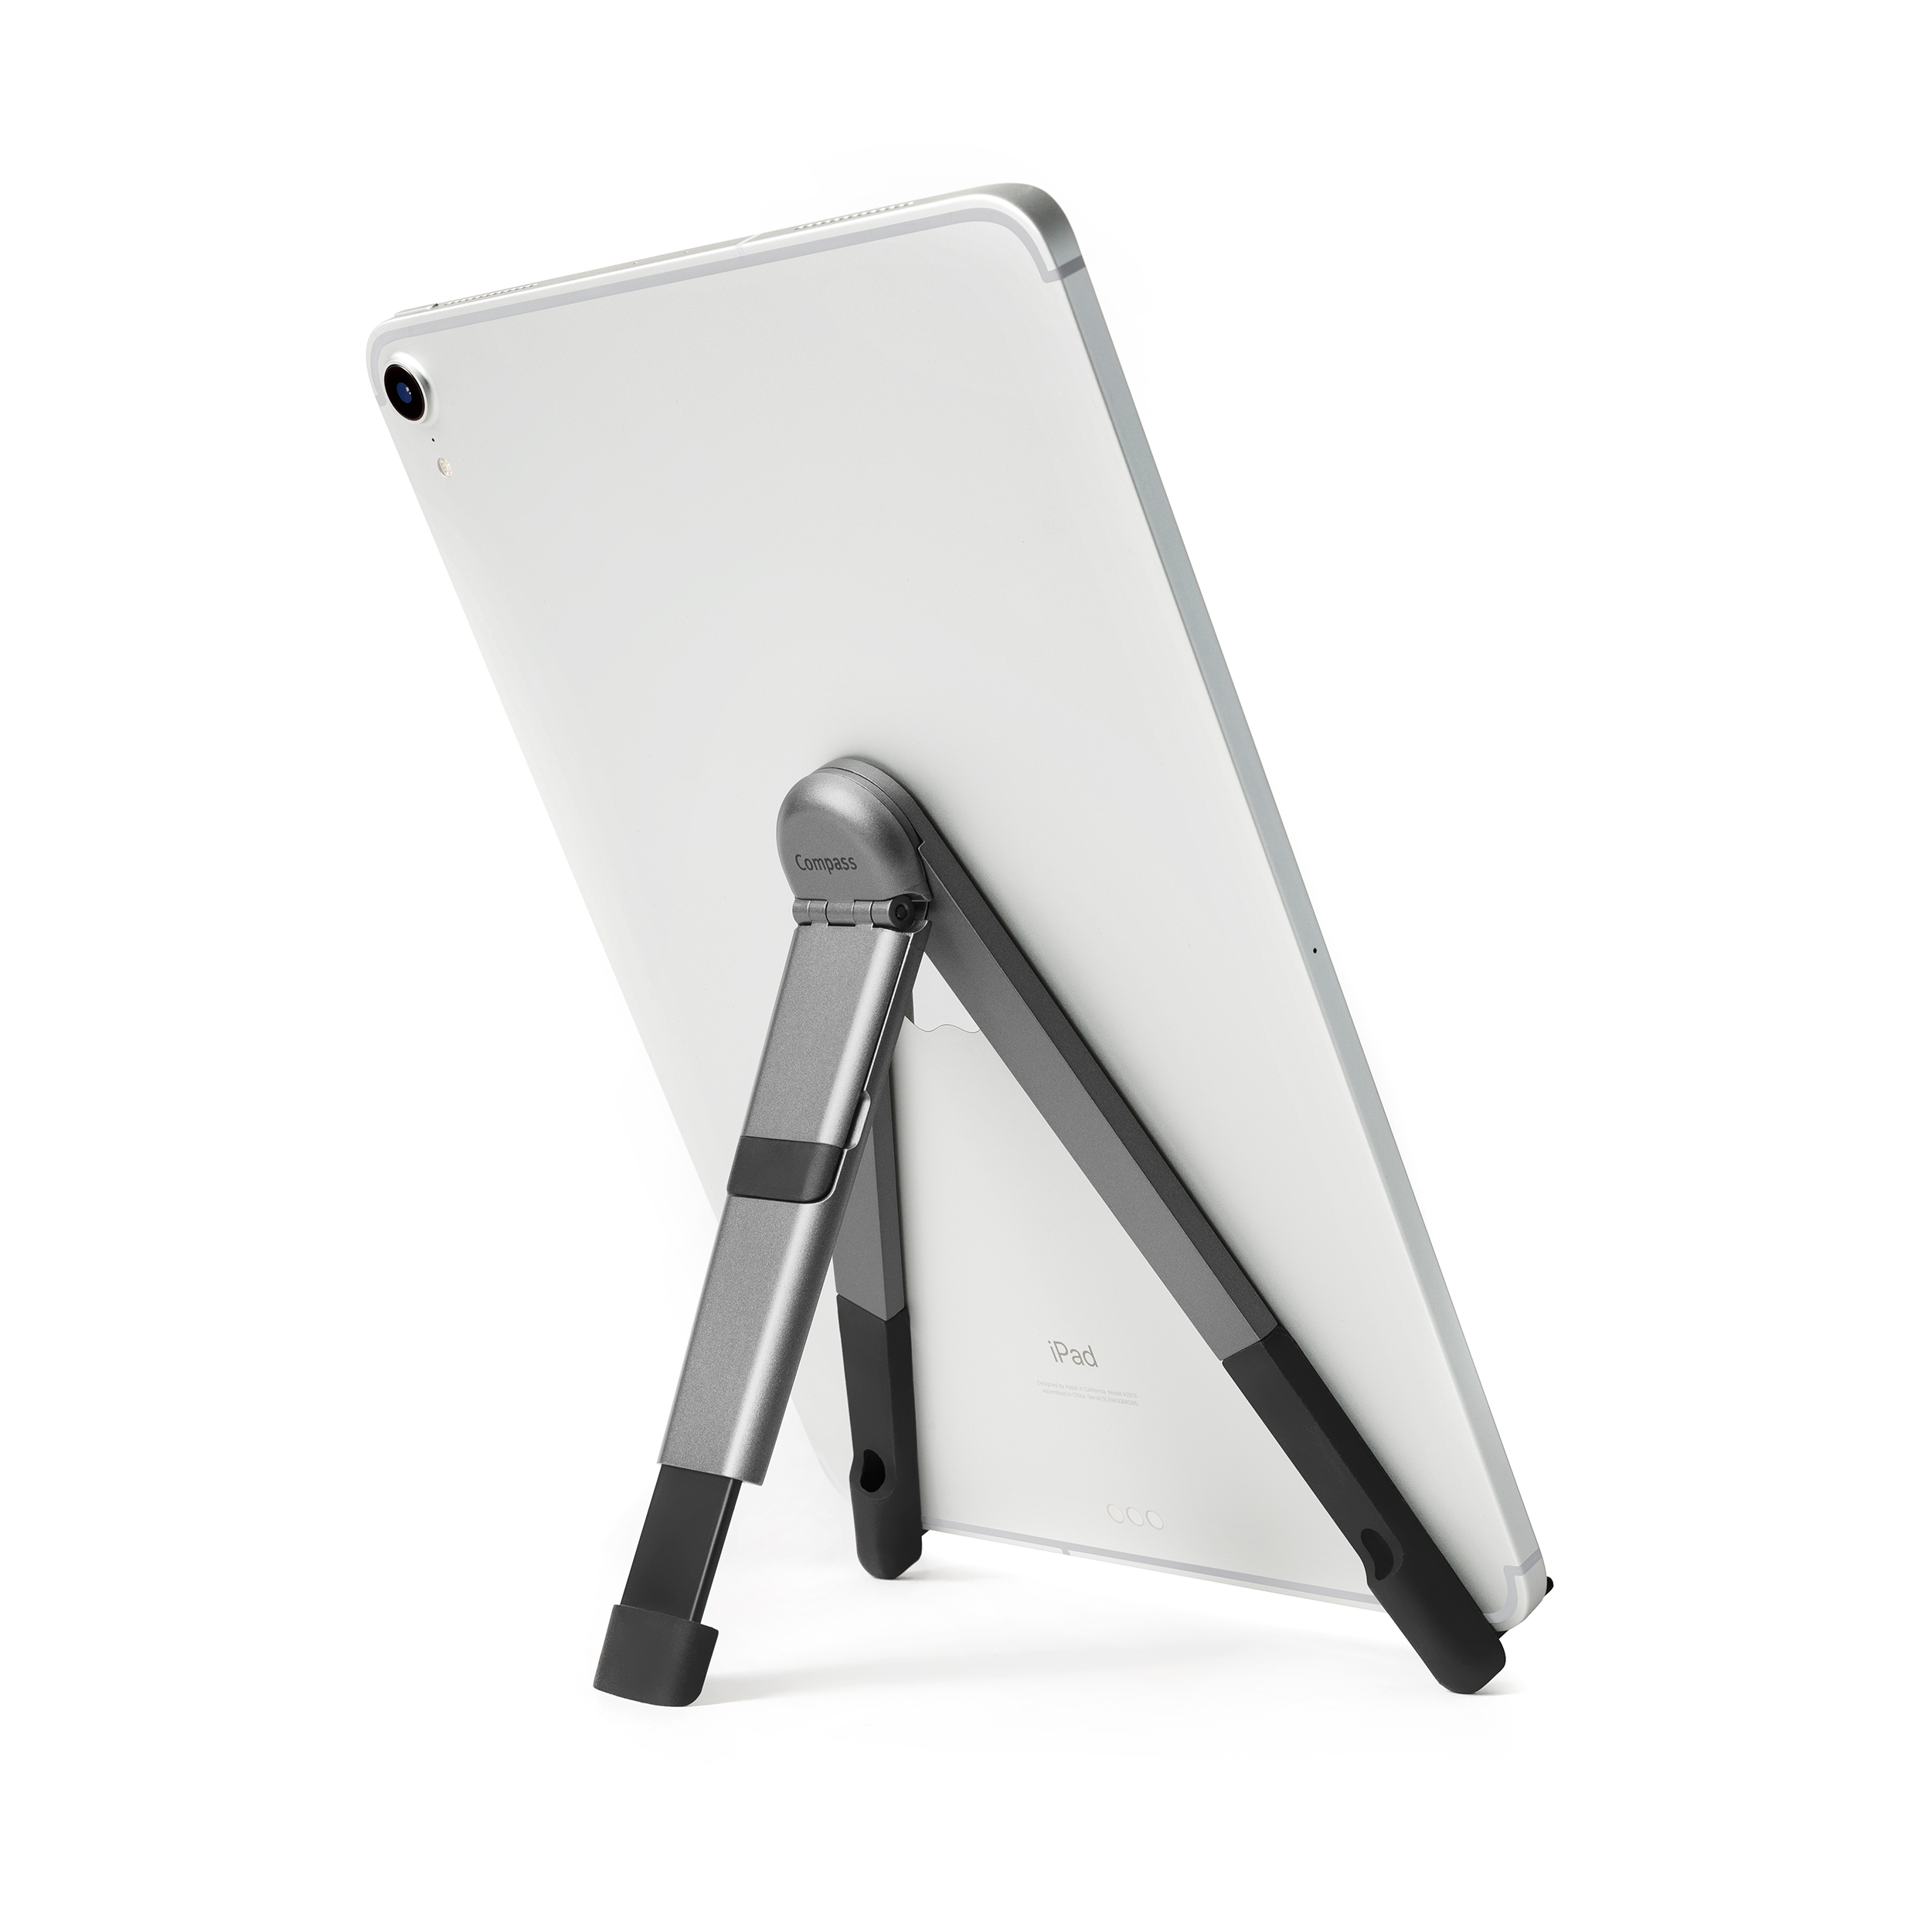 Compass Pro for iPad Pro from Twelve South